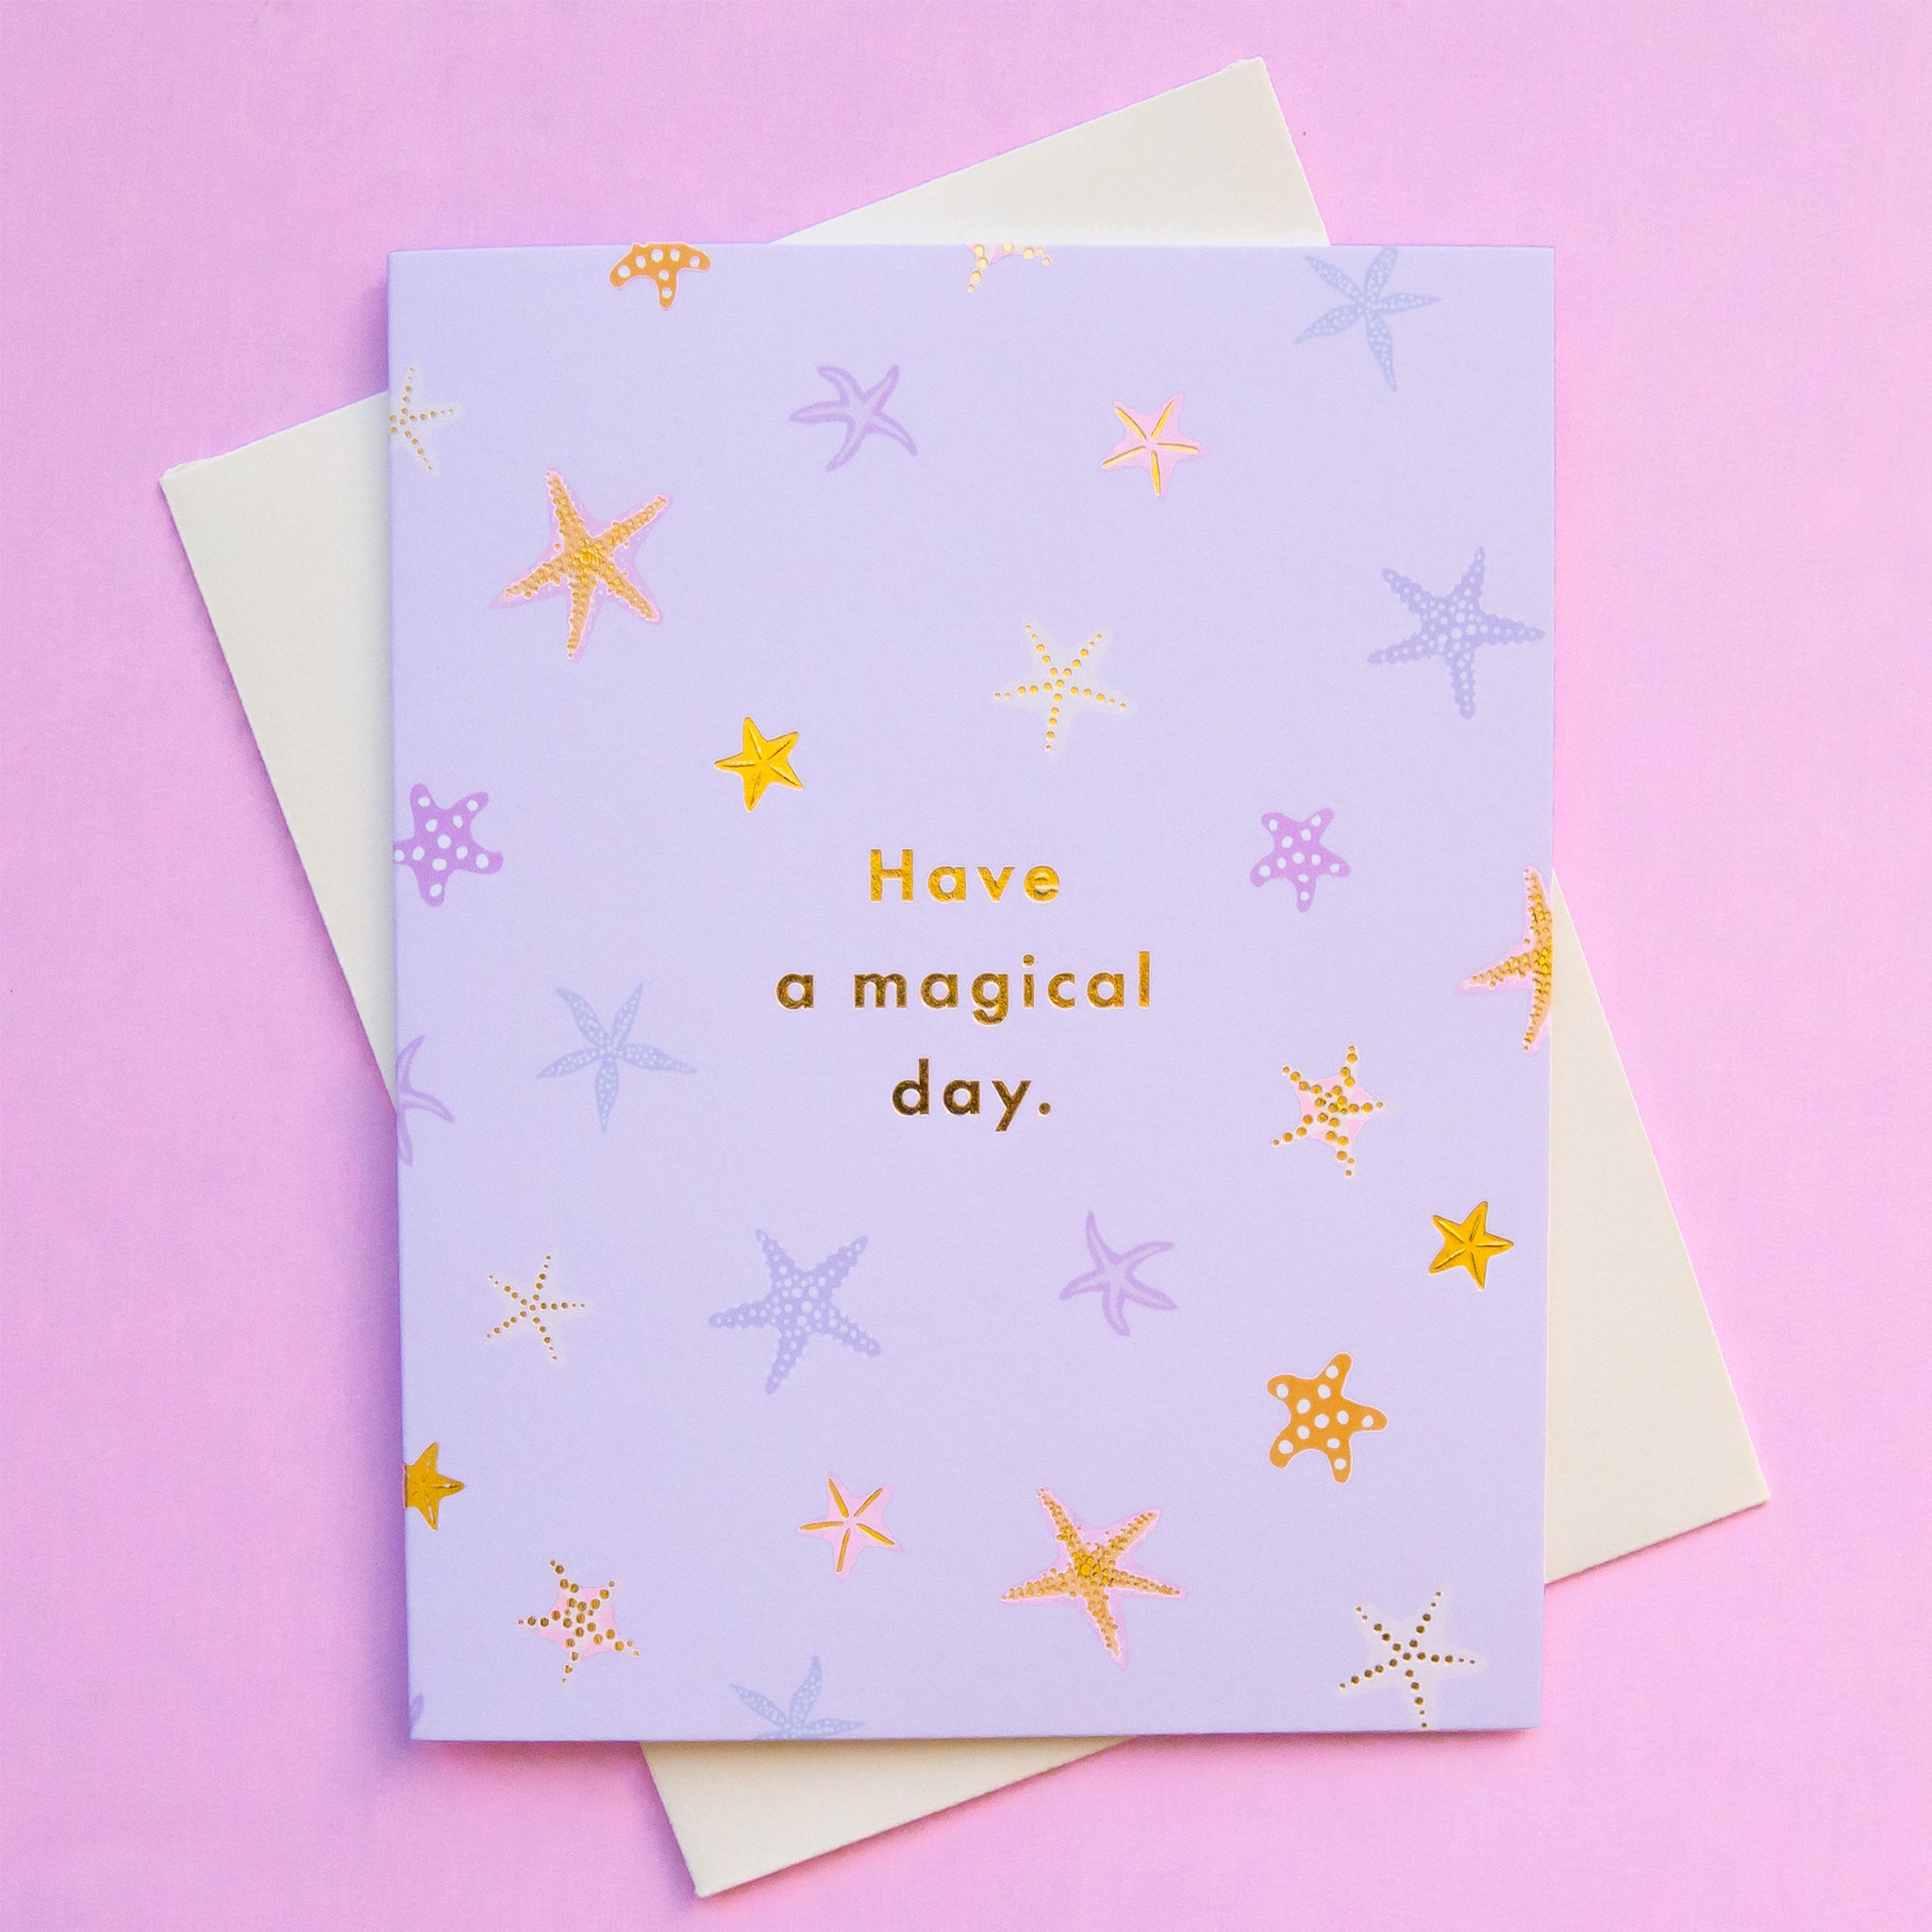 On a pink background is a light pink card with a multi colored starfish pattern and text in the center that reads, "Have a magical day.".